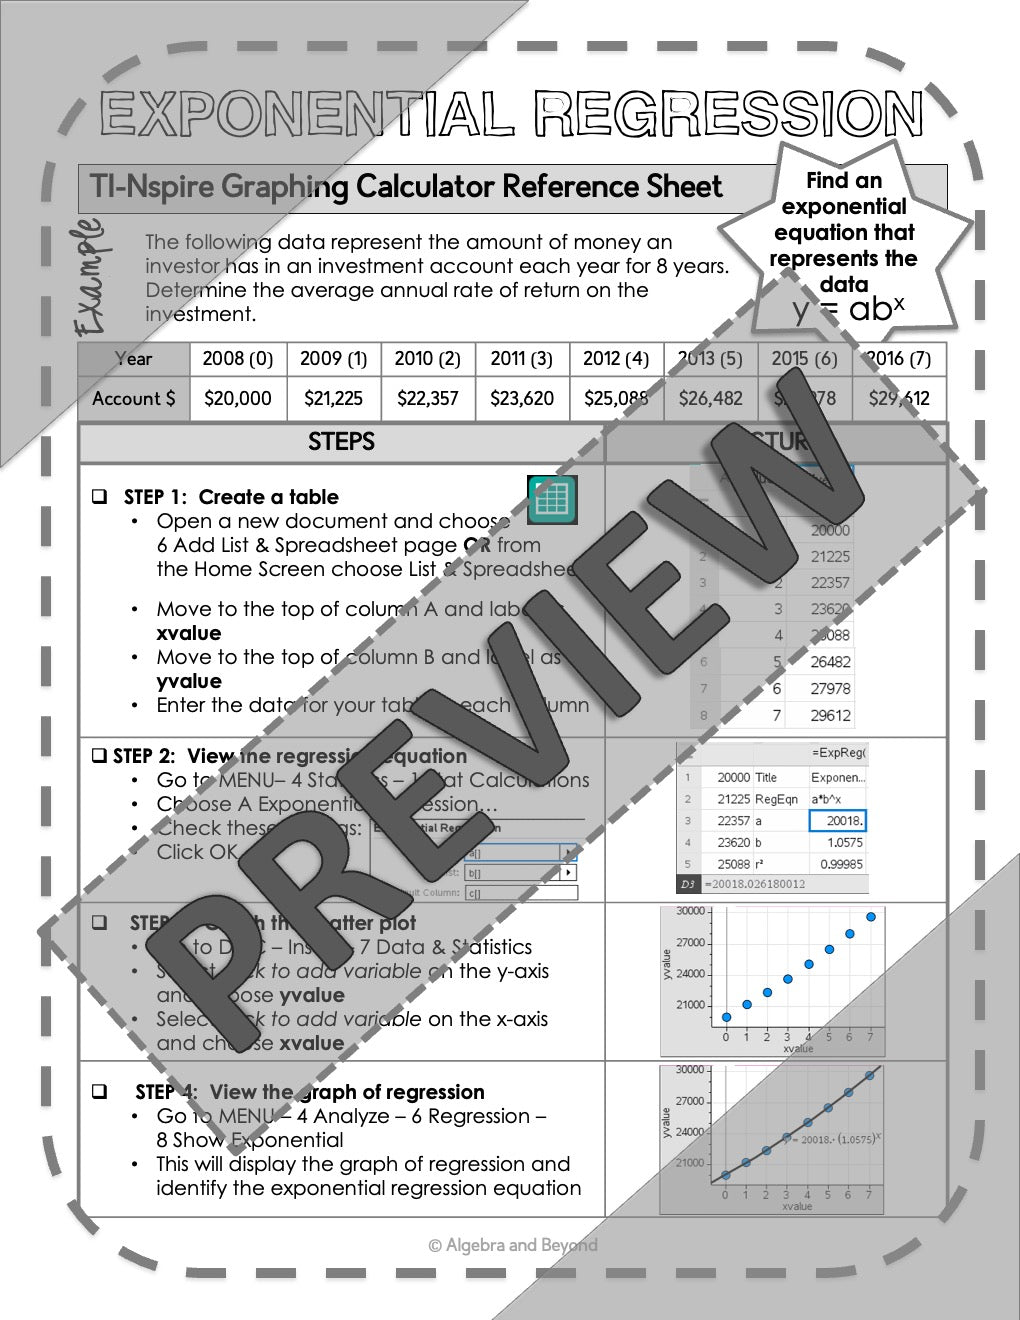 Graphing Exponential Regression | TI-Nspire Calculator Reference Sheets